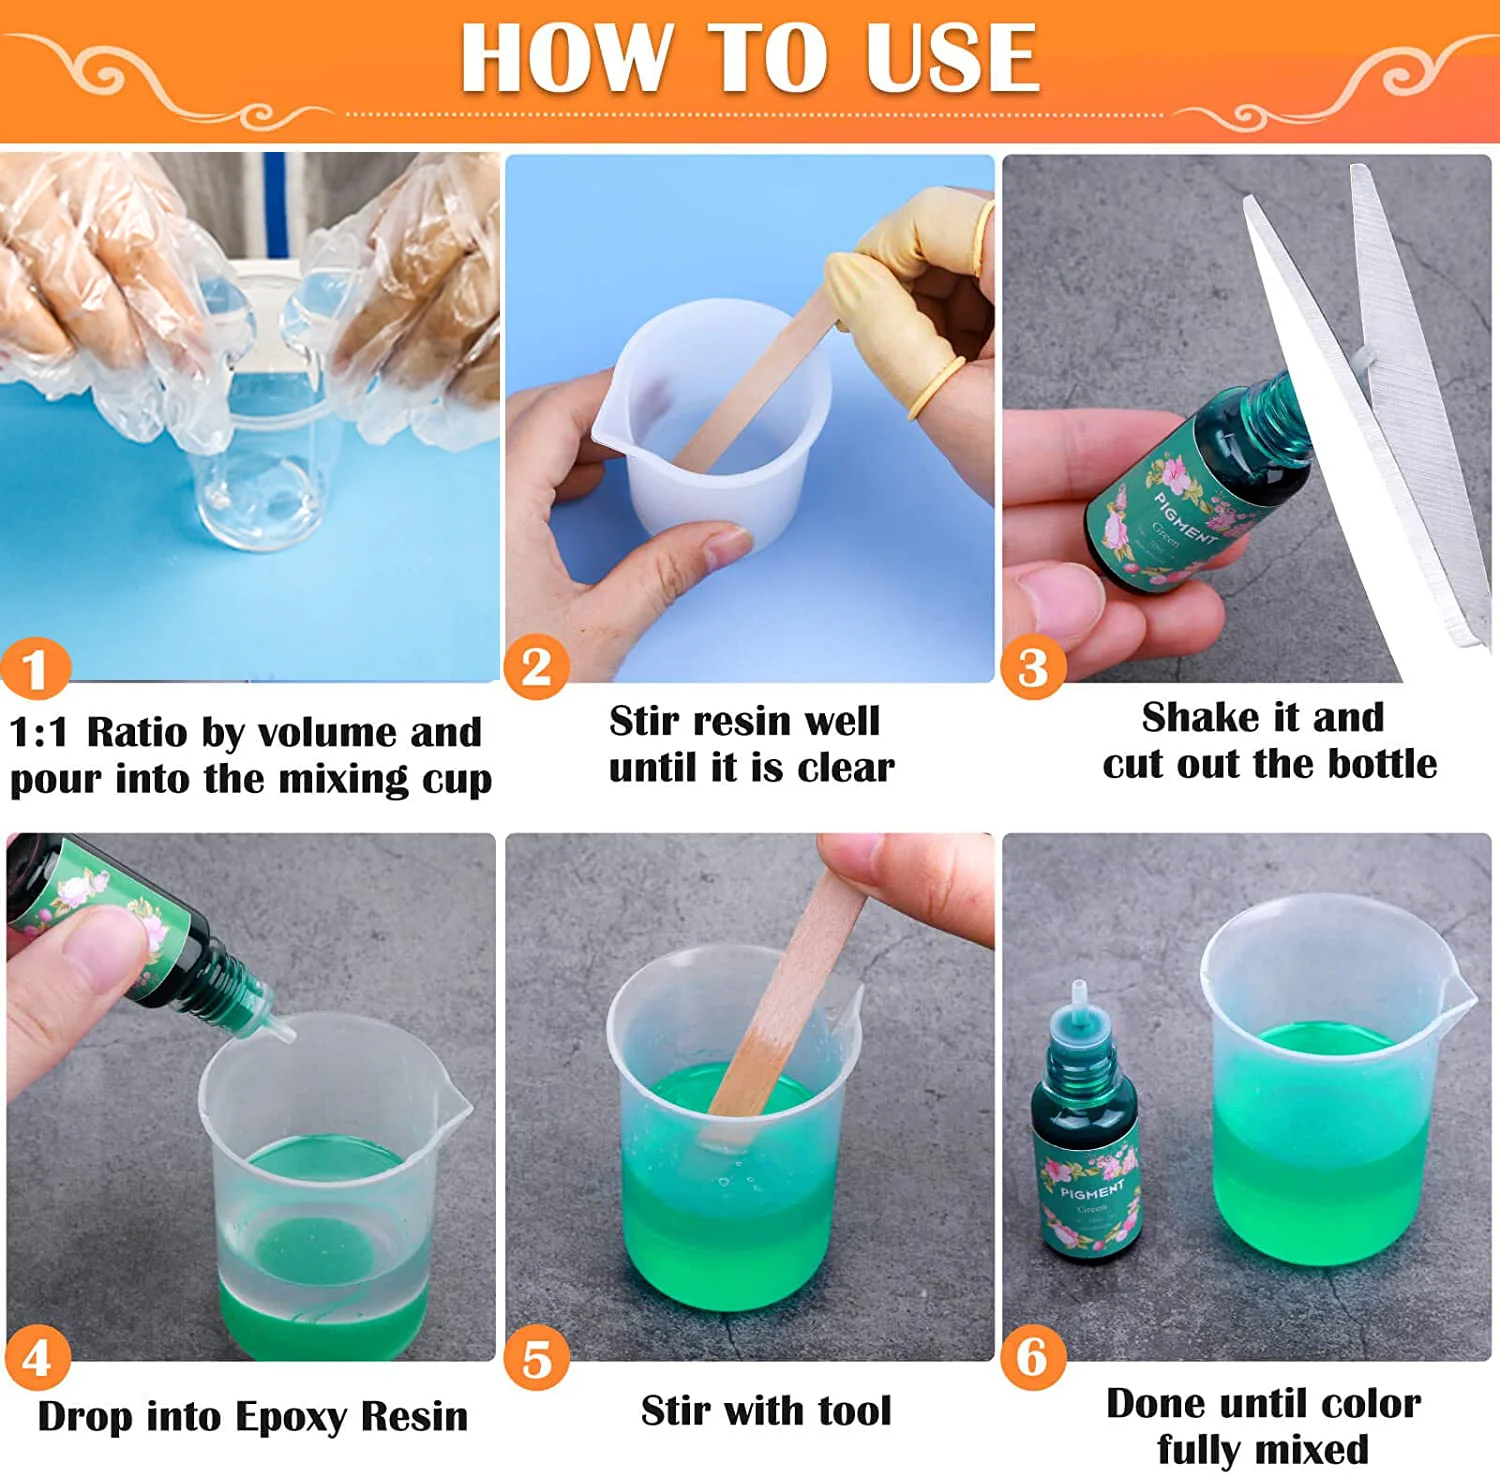 DIY coaster resin mold round rectangular tray holder crystal UV protection epoxy resin silicone home decoration resin crafts